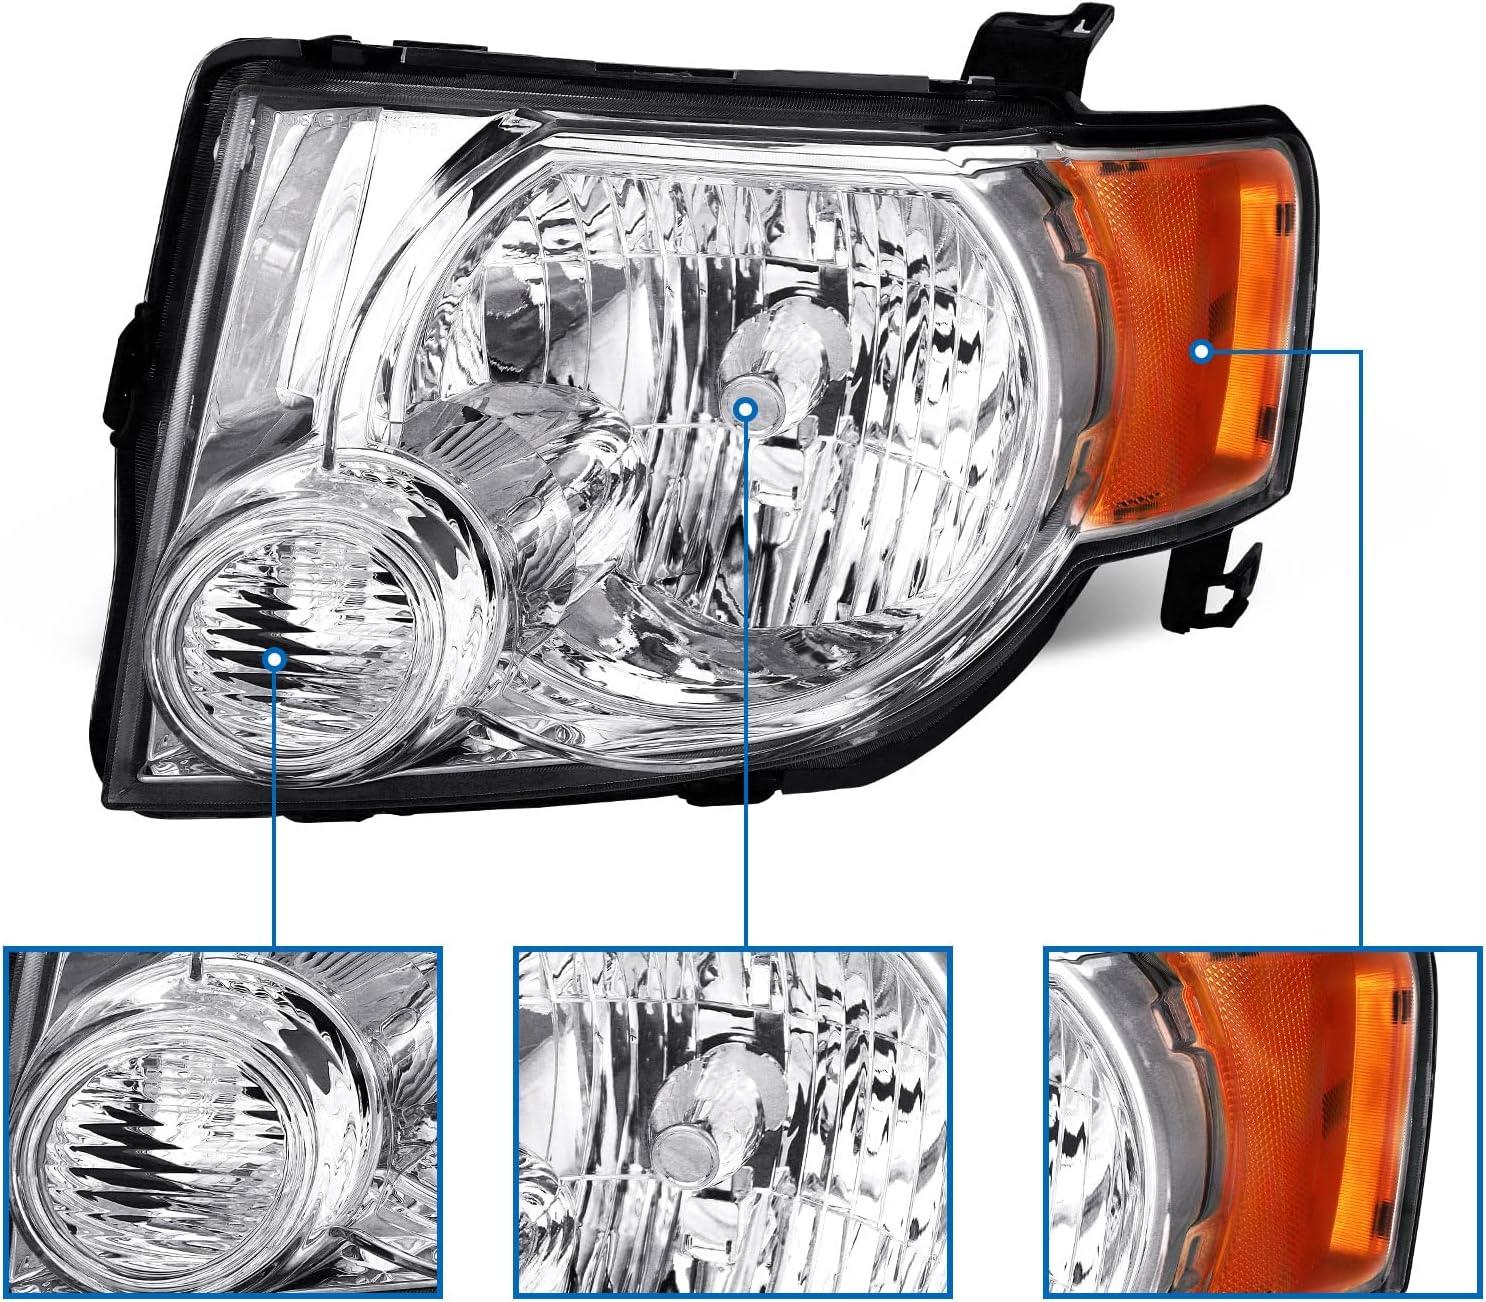 Headlight for 2008-2012 Ford Escape Driver and Passenger Side - Goodmatchup